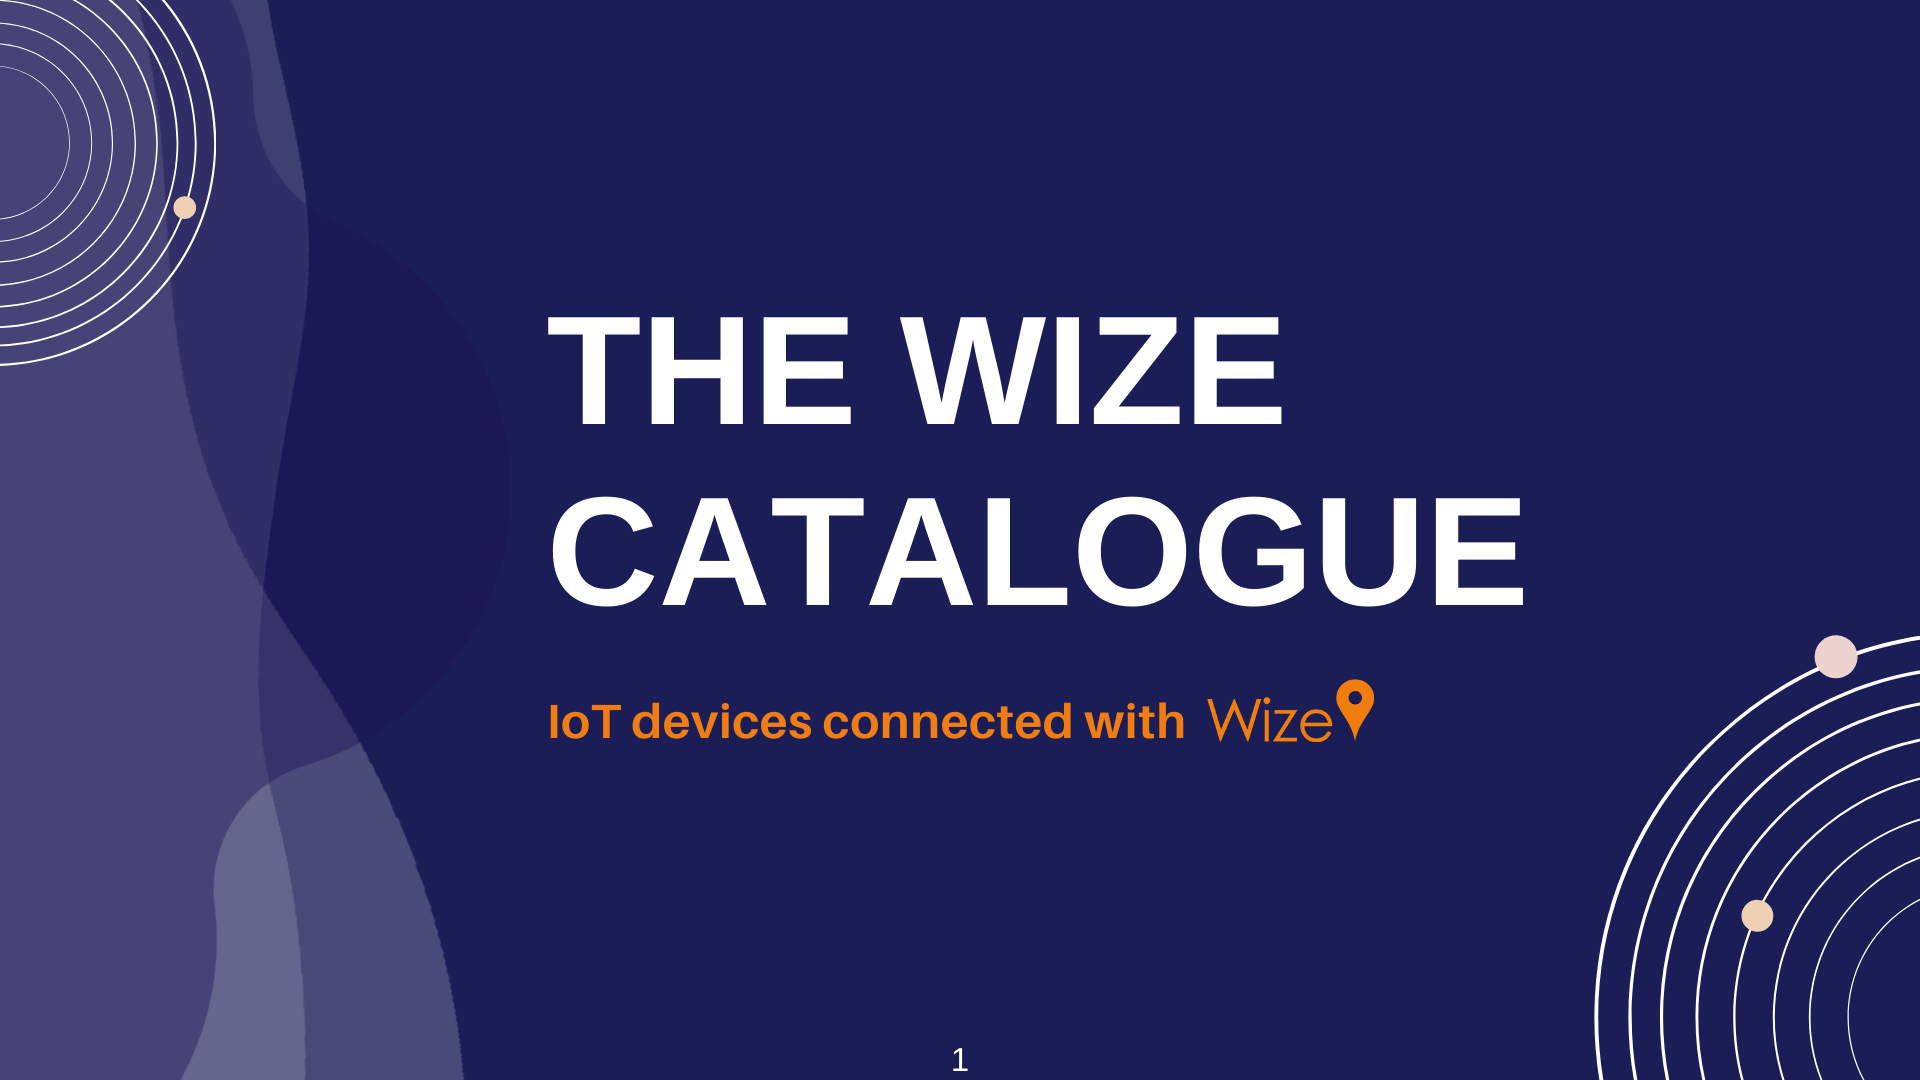 The Wize Catalogue